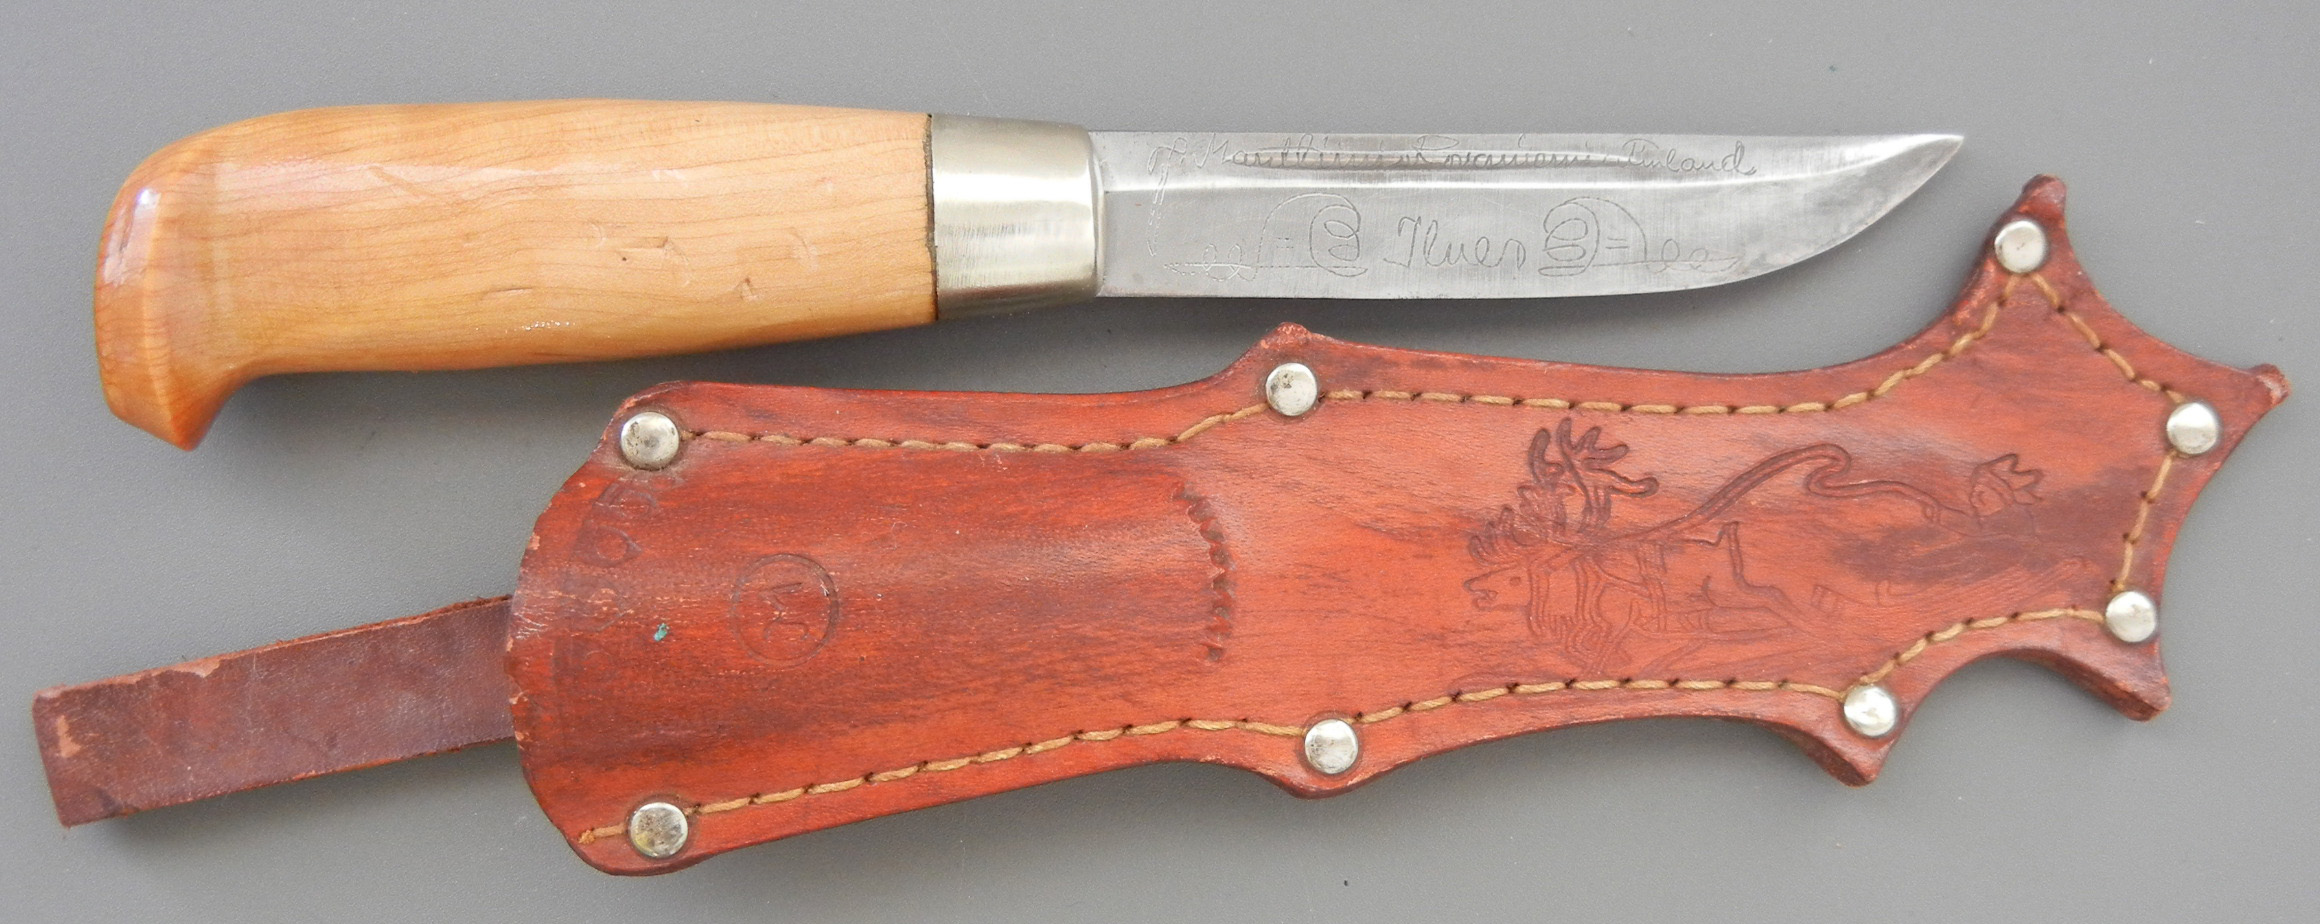 SOLD - Original Ilves Knife - SOLD - Click Image to Close